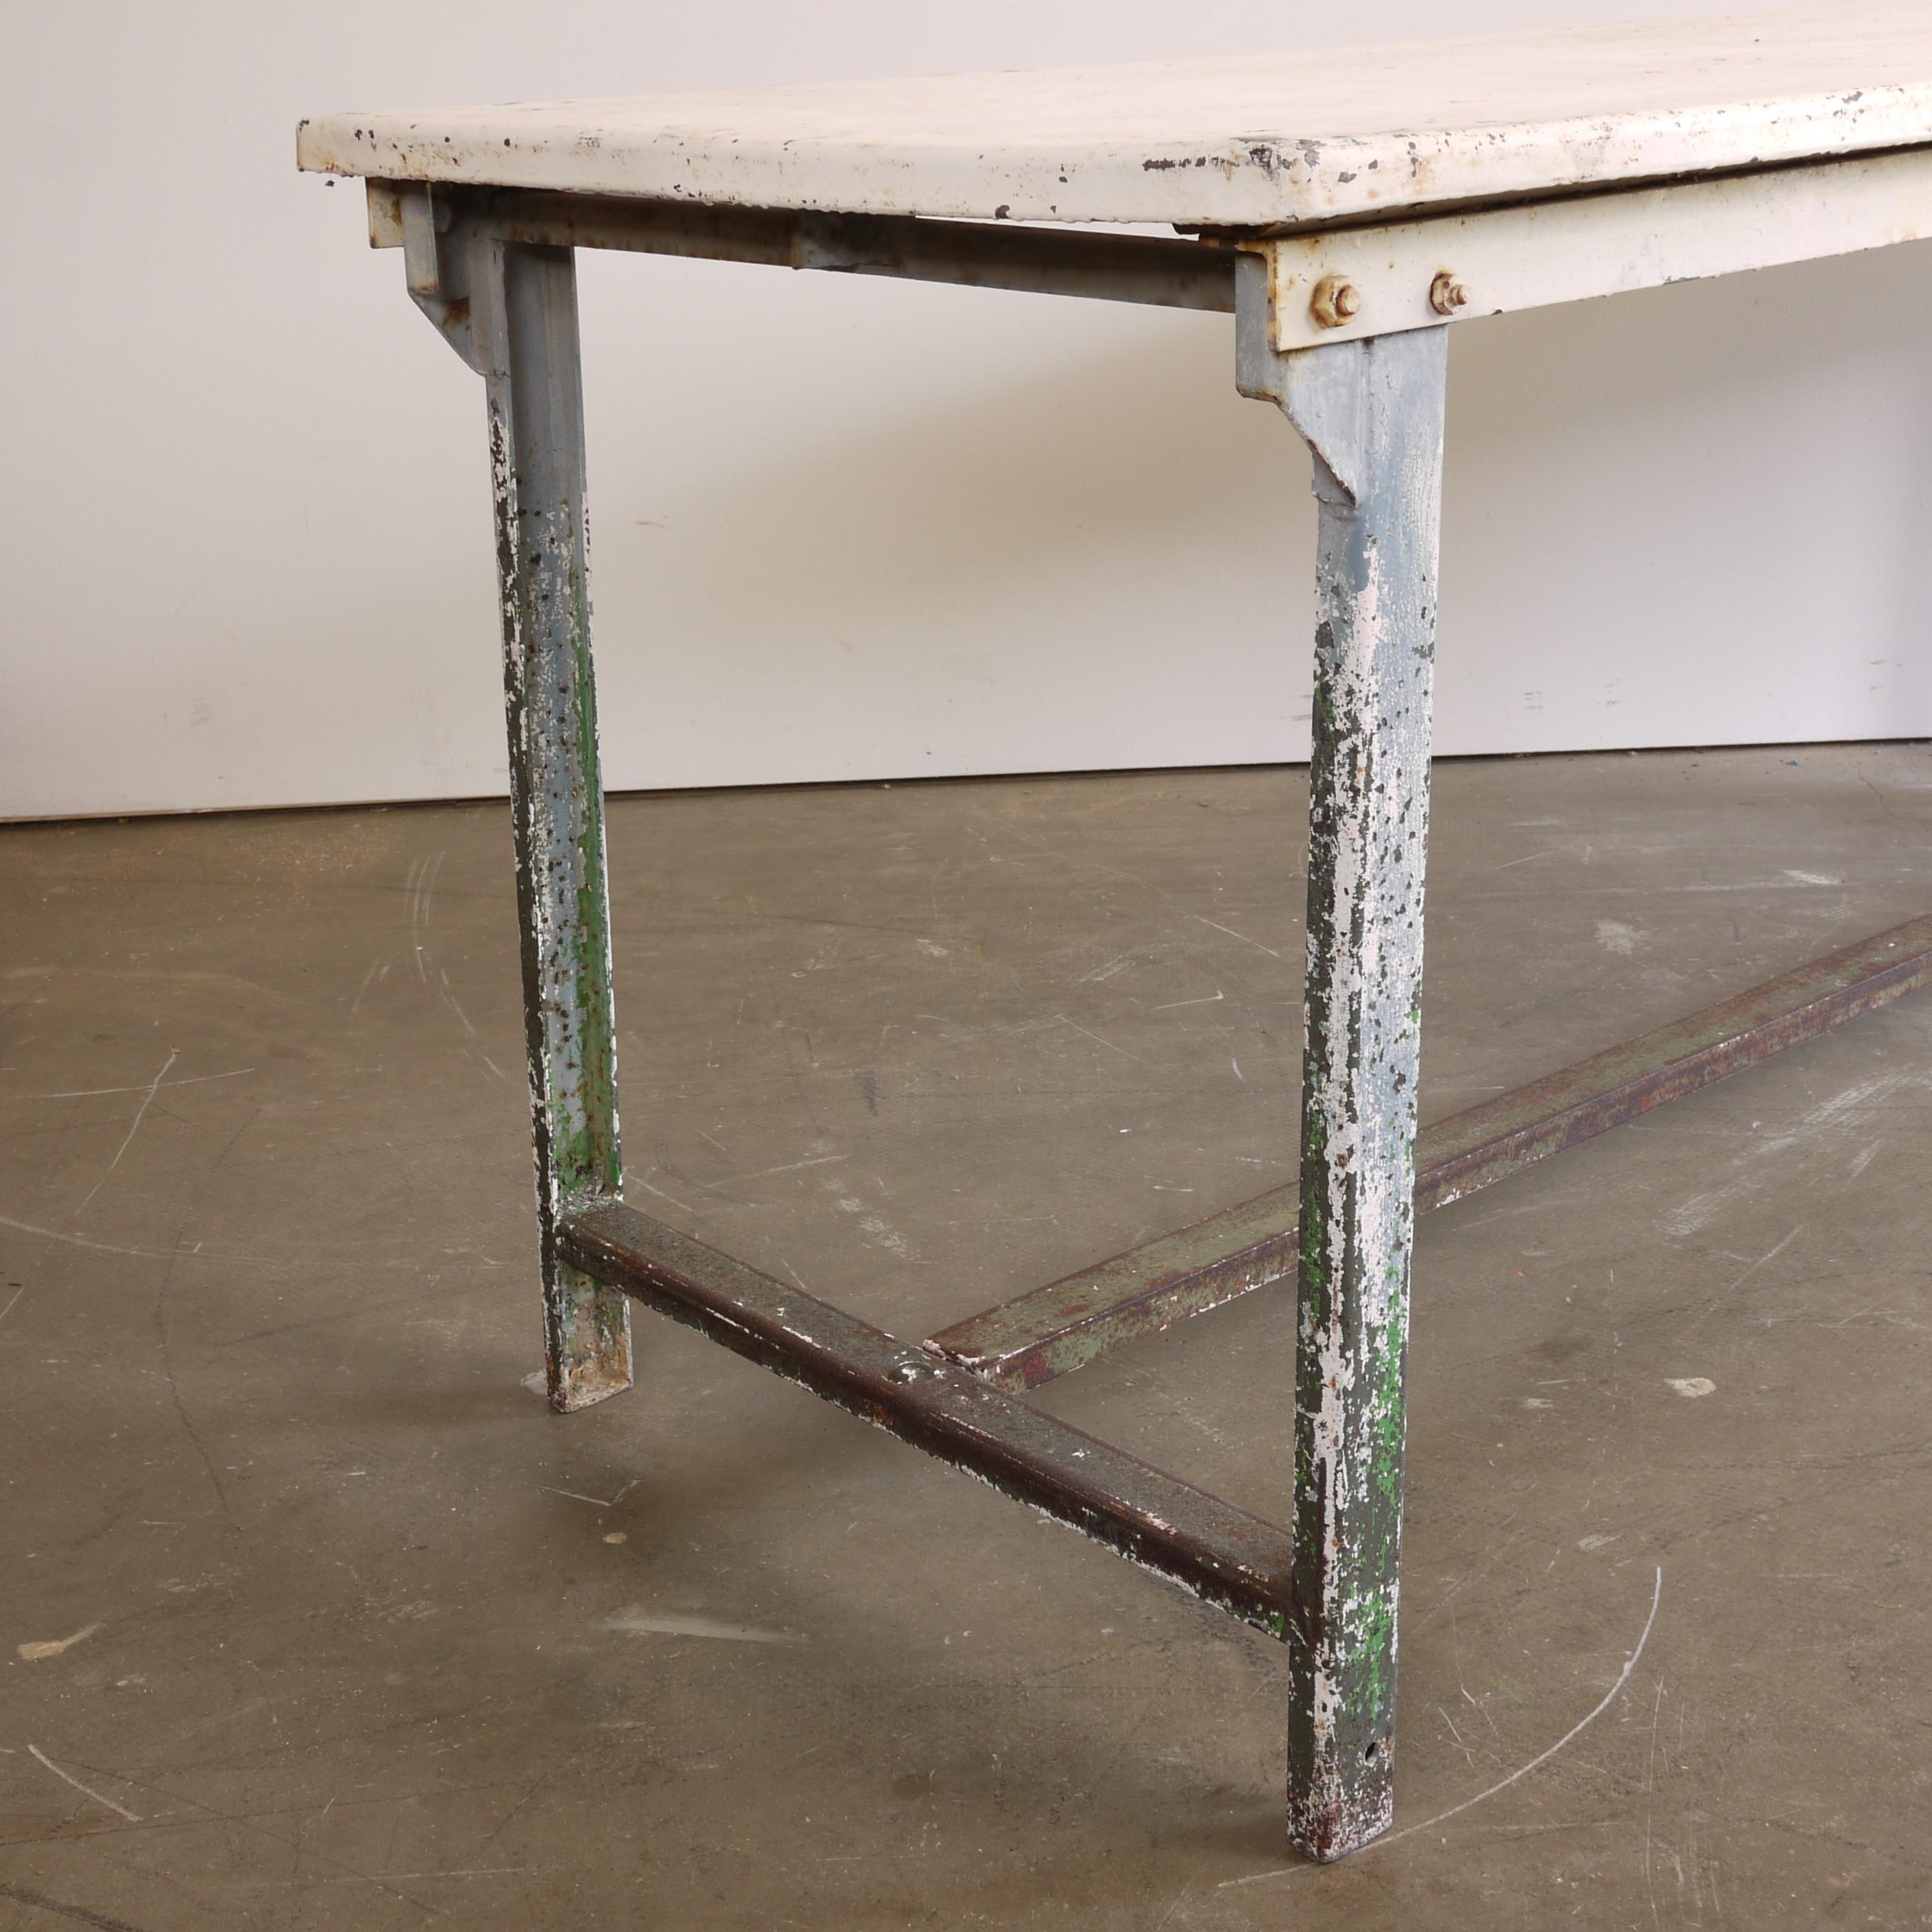 1960s vintage rectangular industrial white metal dining, statement table. A weathered industrial metal table sourced from the South of France still retaining its original weathered white painted finish just oozing character and patina. The panelled